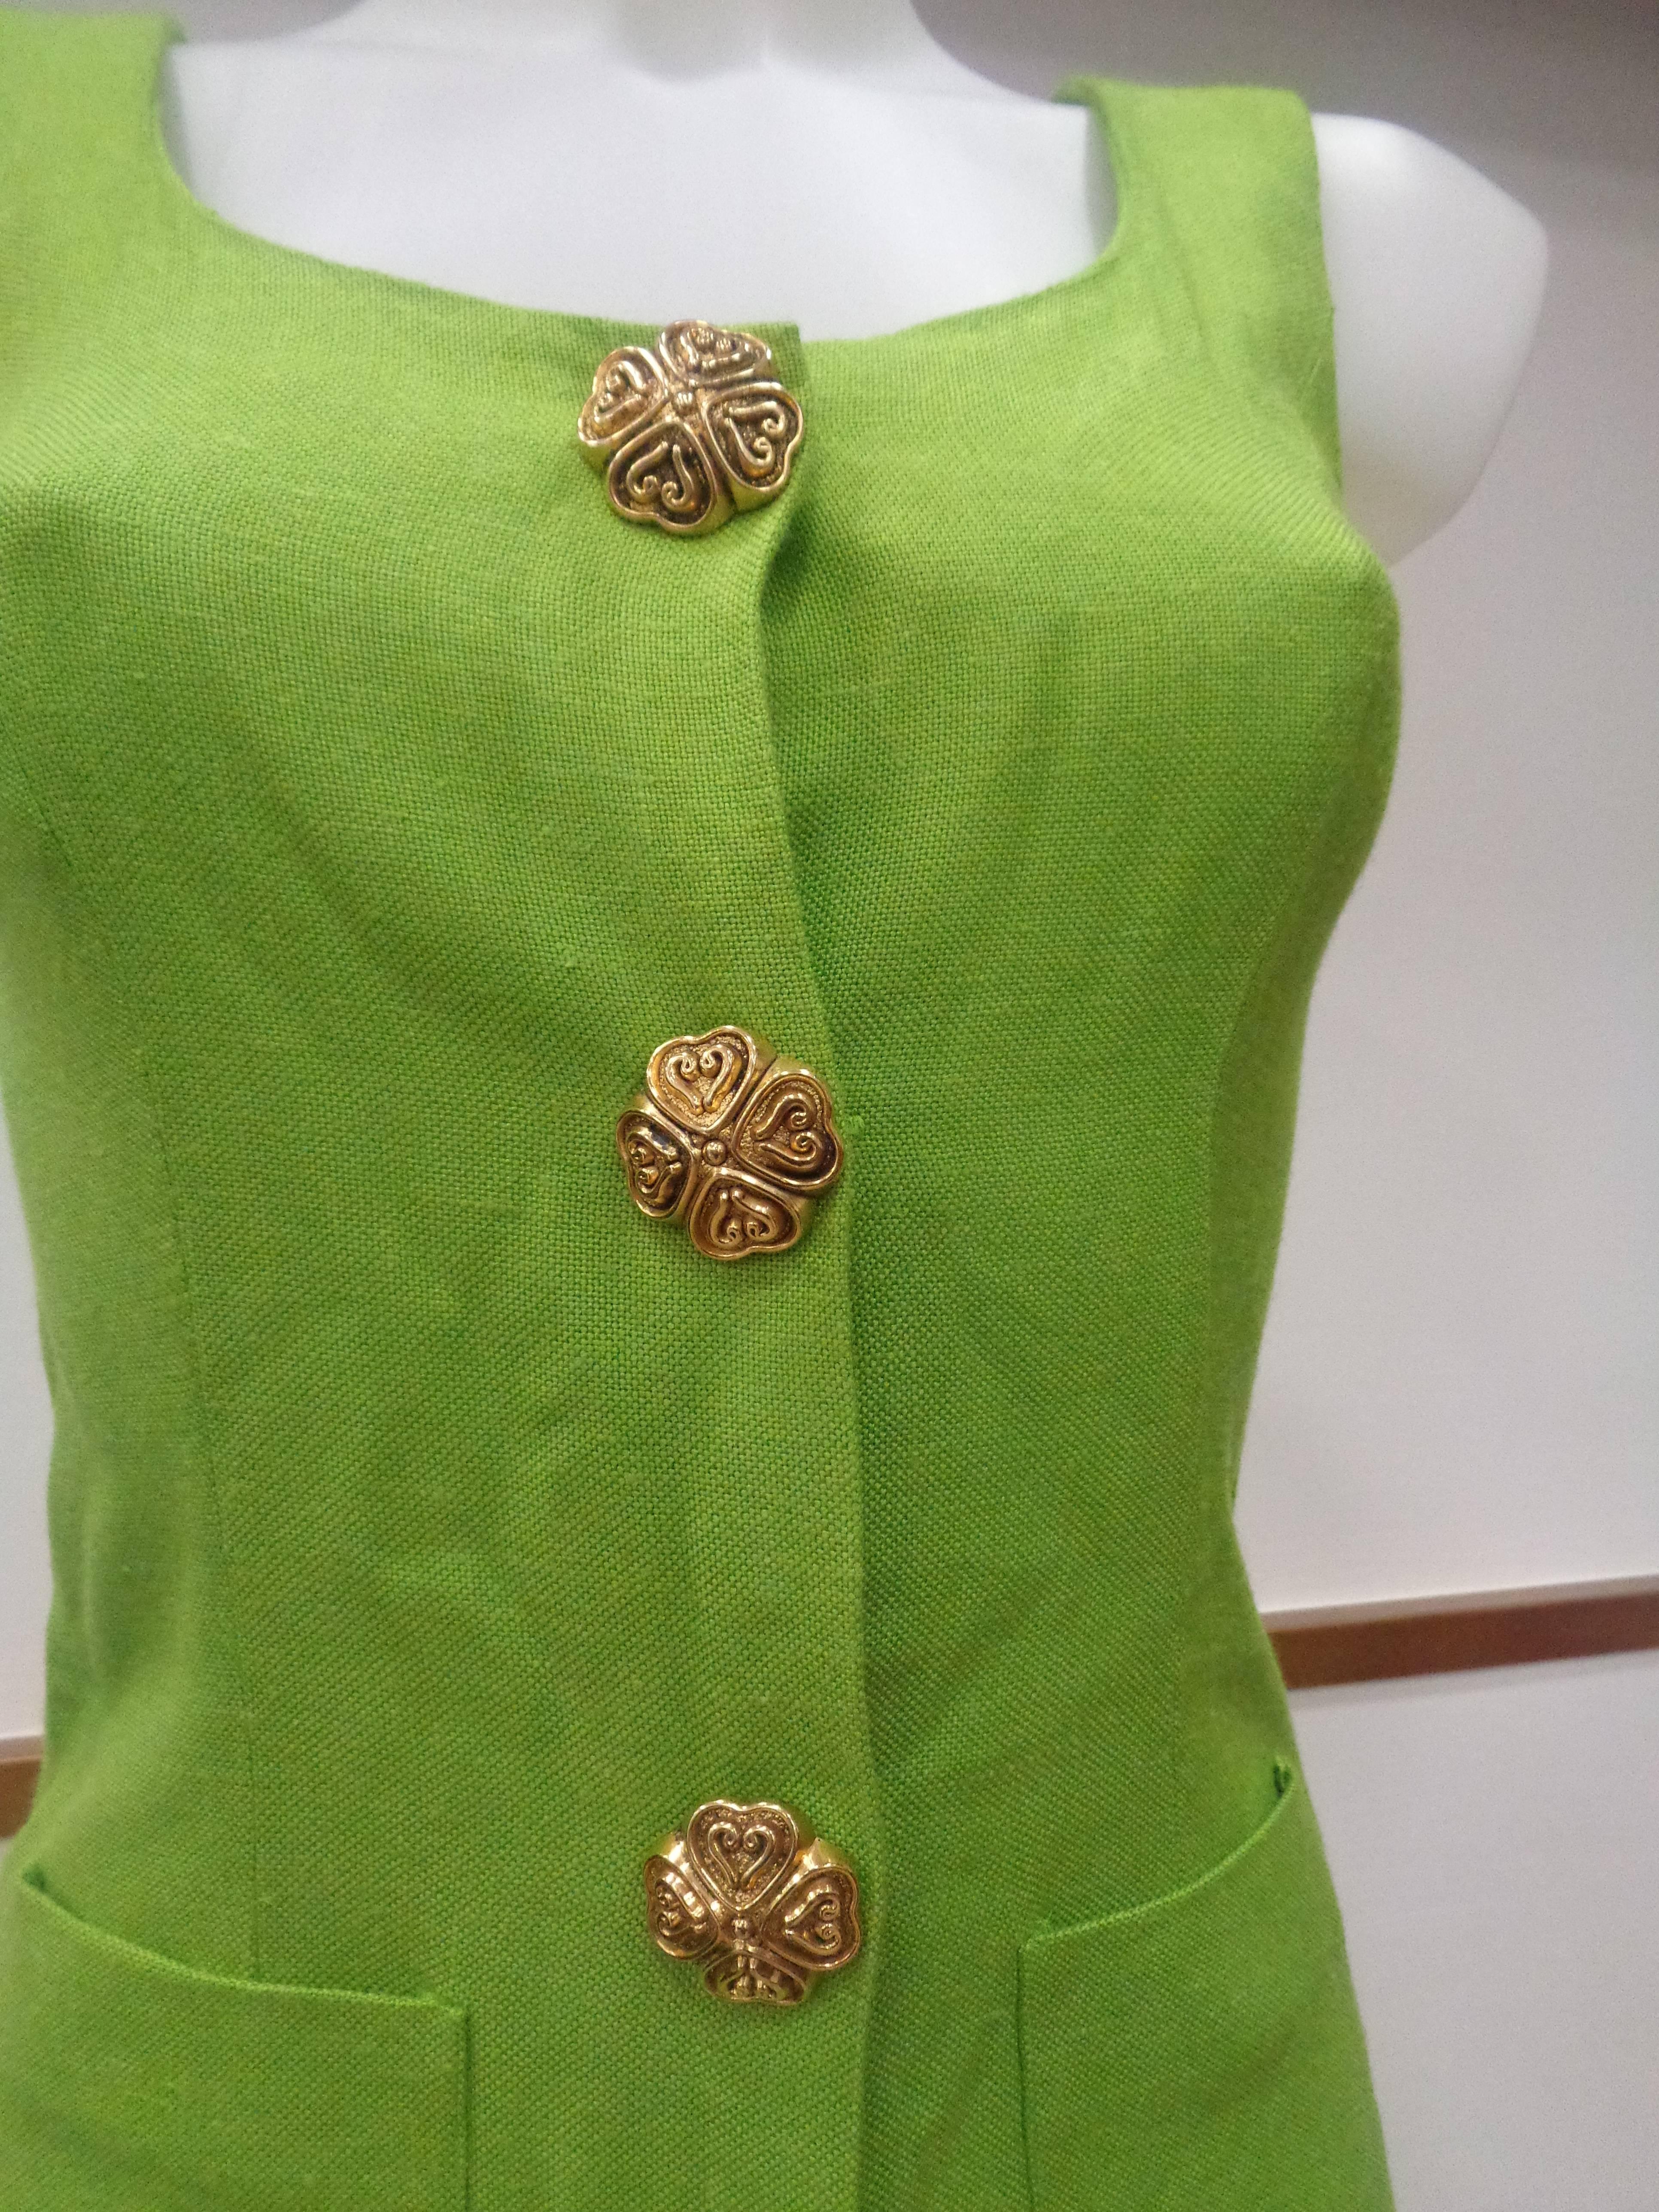 Moschino Green gold tone hardware Dress

Totally made in italy in size 42

Composition: rayon and other